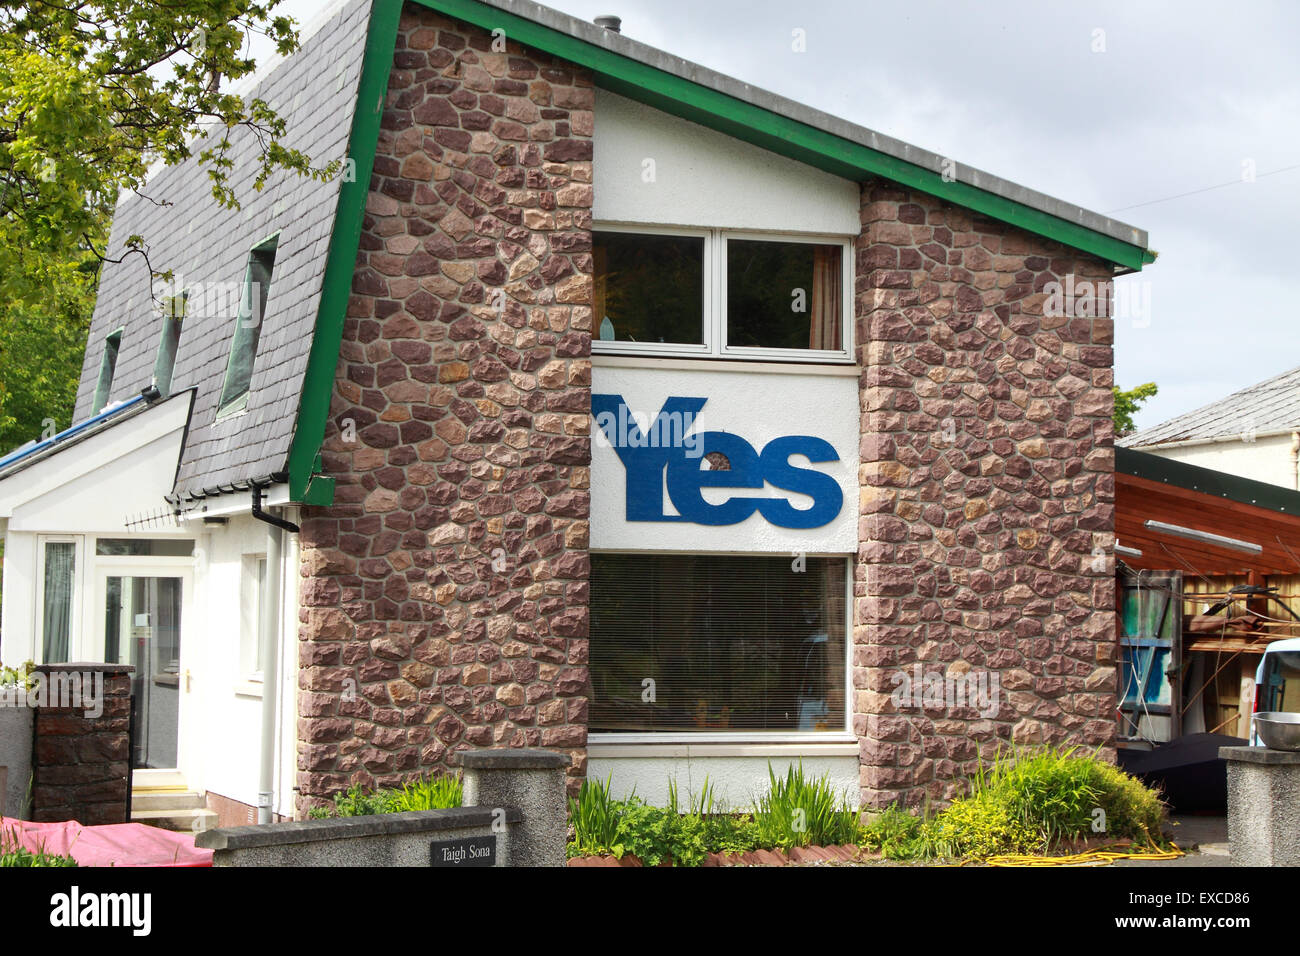 A residential house in Ullapool, supporting the YES referendum for an independent Scotland Stock Photo